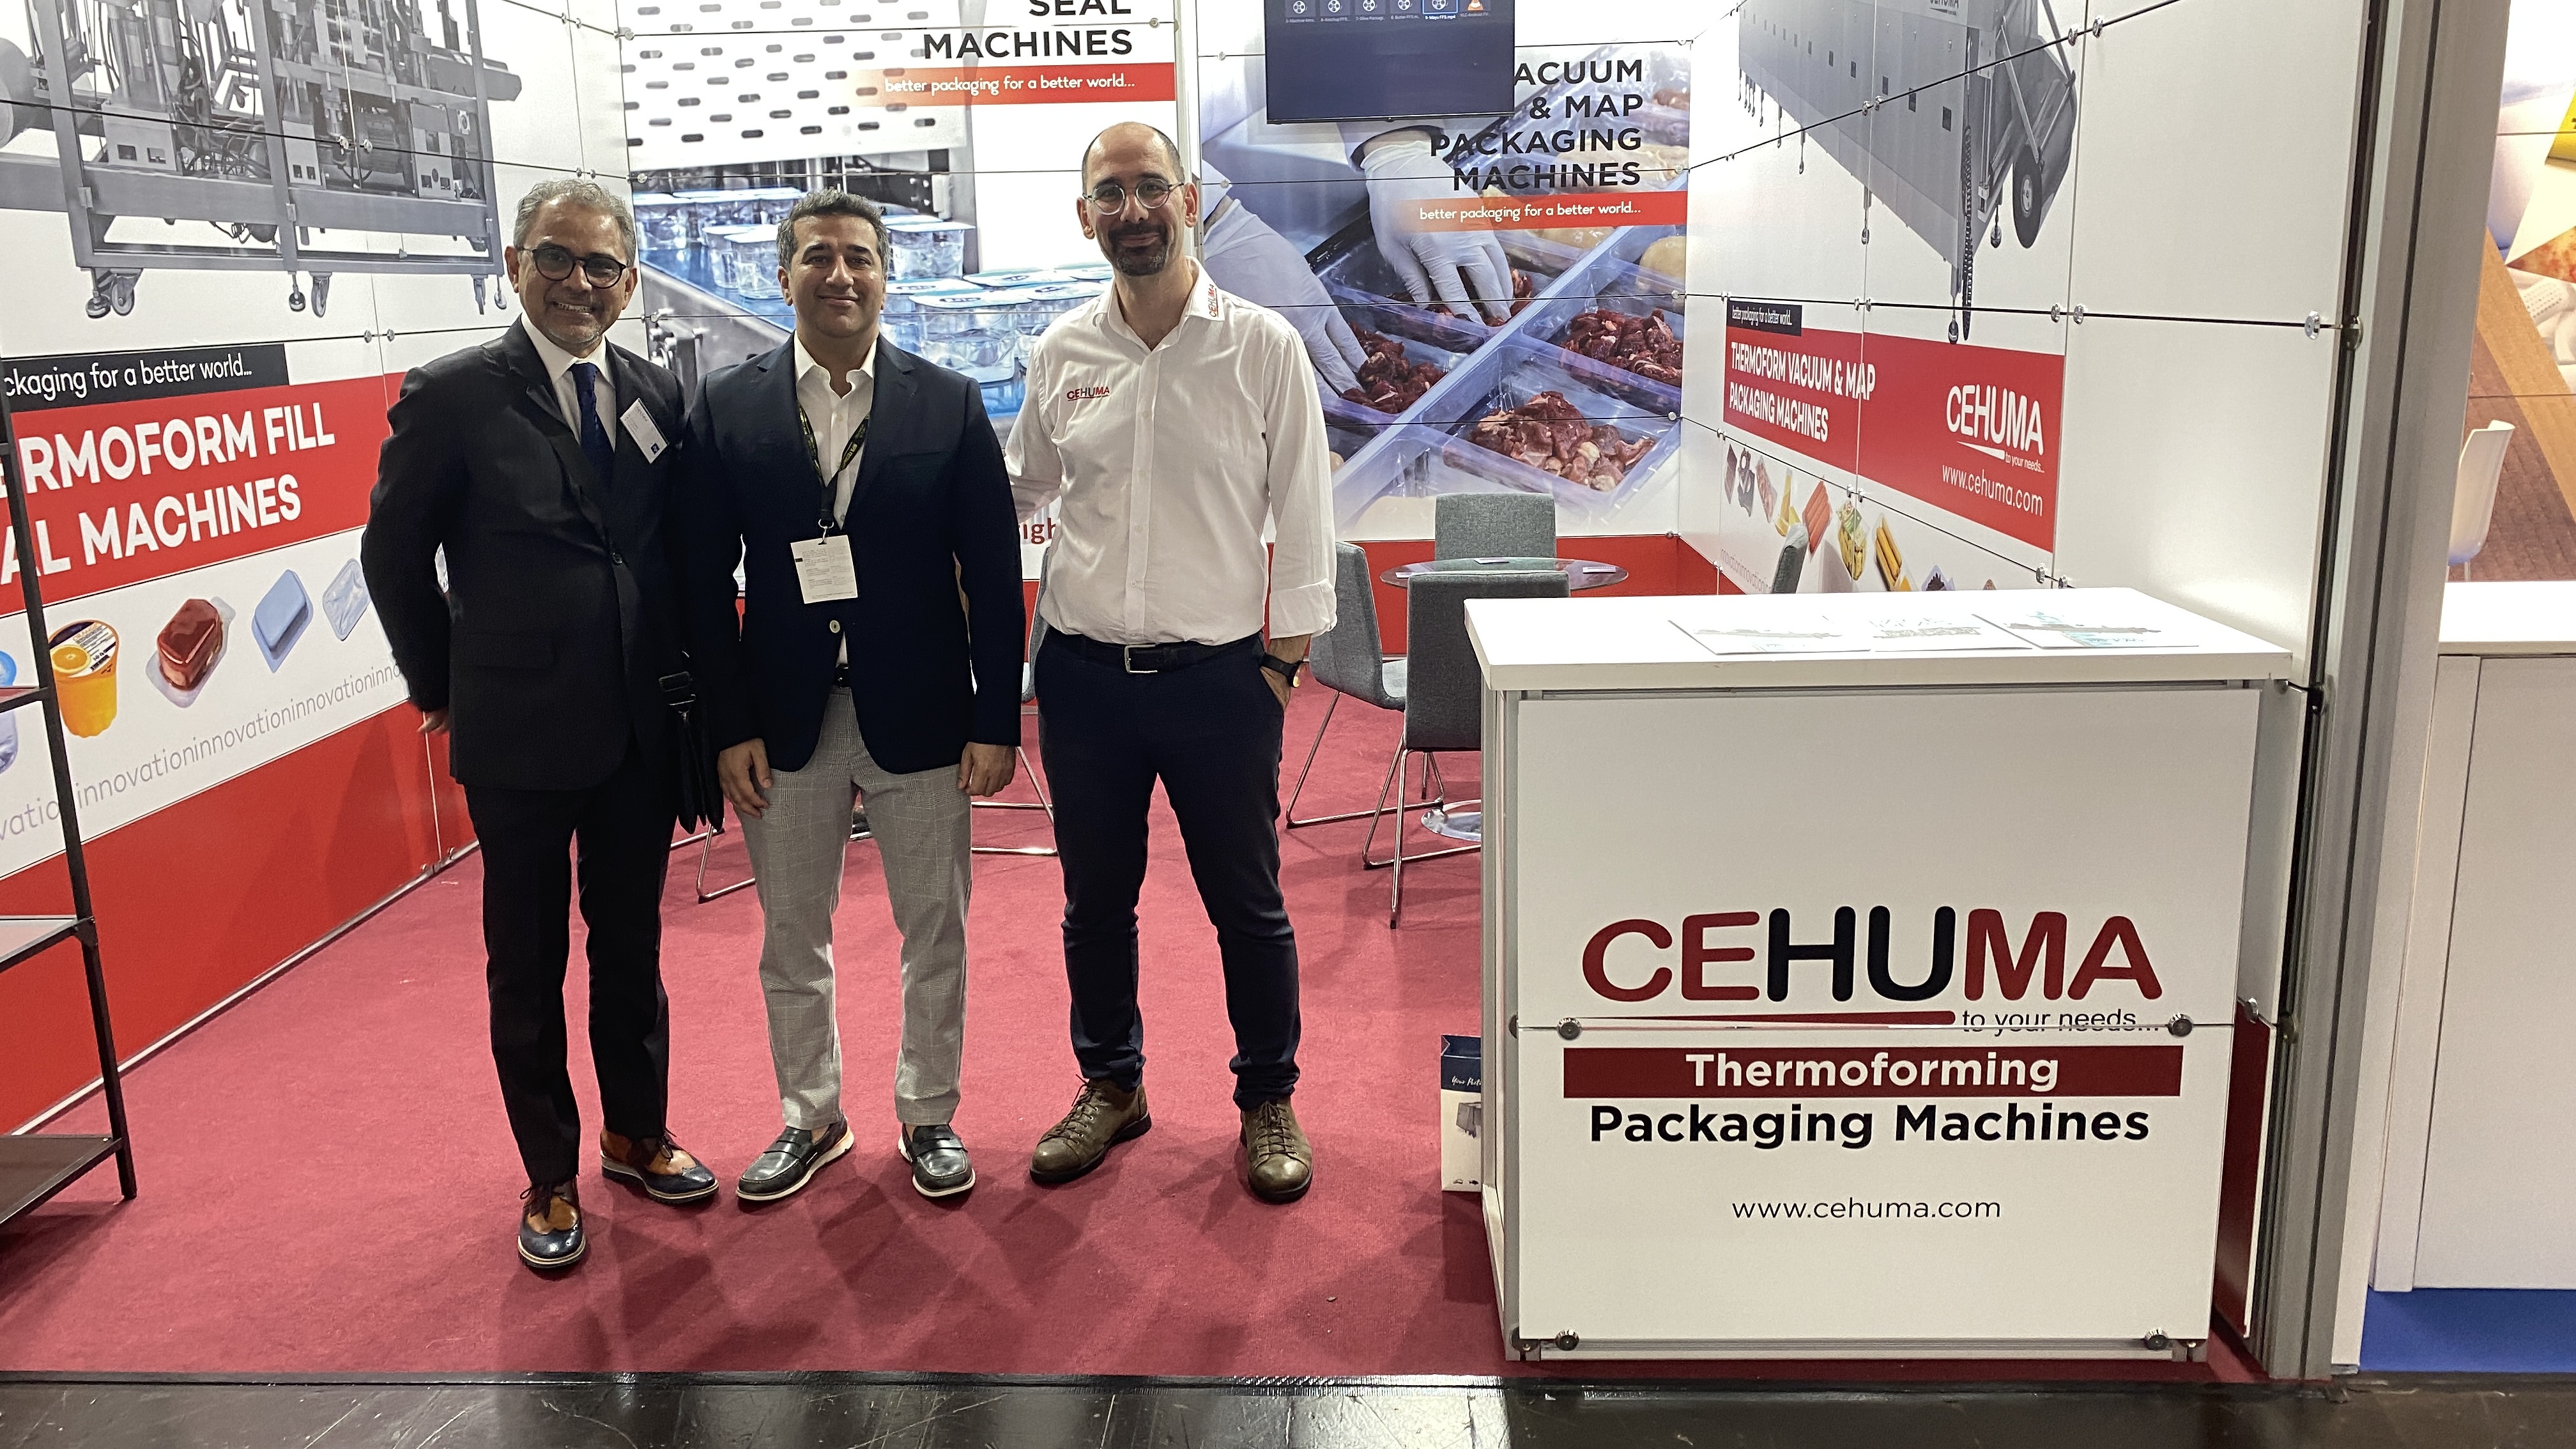 CEHUMA at Interpack 23, the Leading Packaging Exhibition